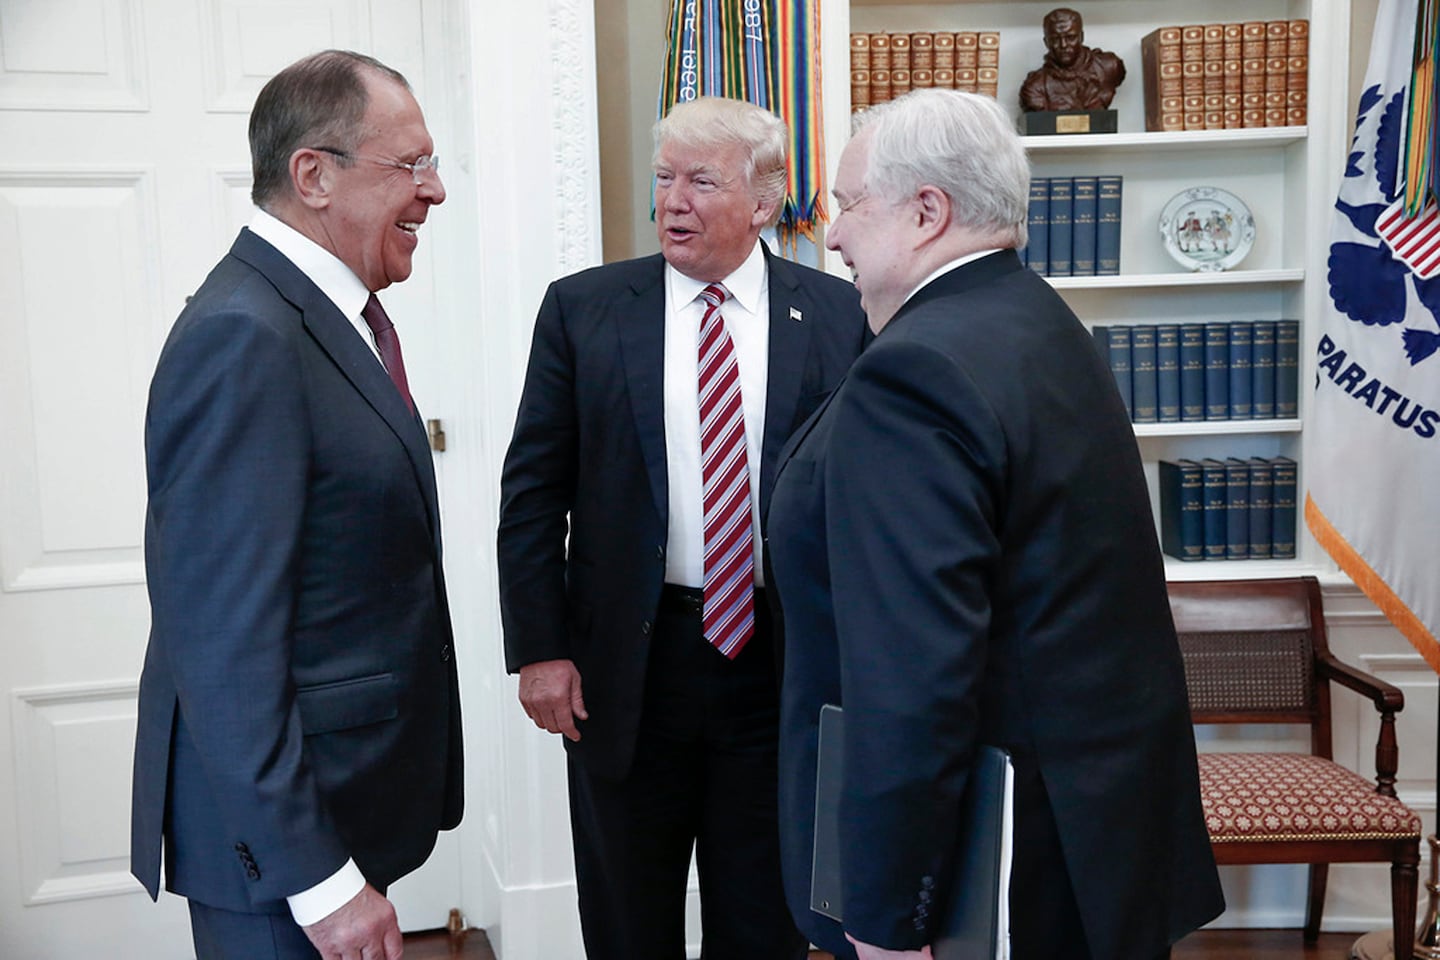 Trump revealed highly classified information to Russian foreign minister and ambassador